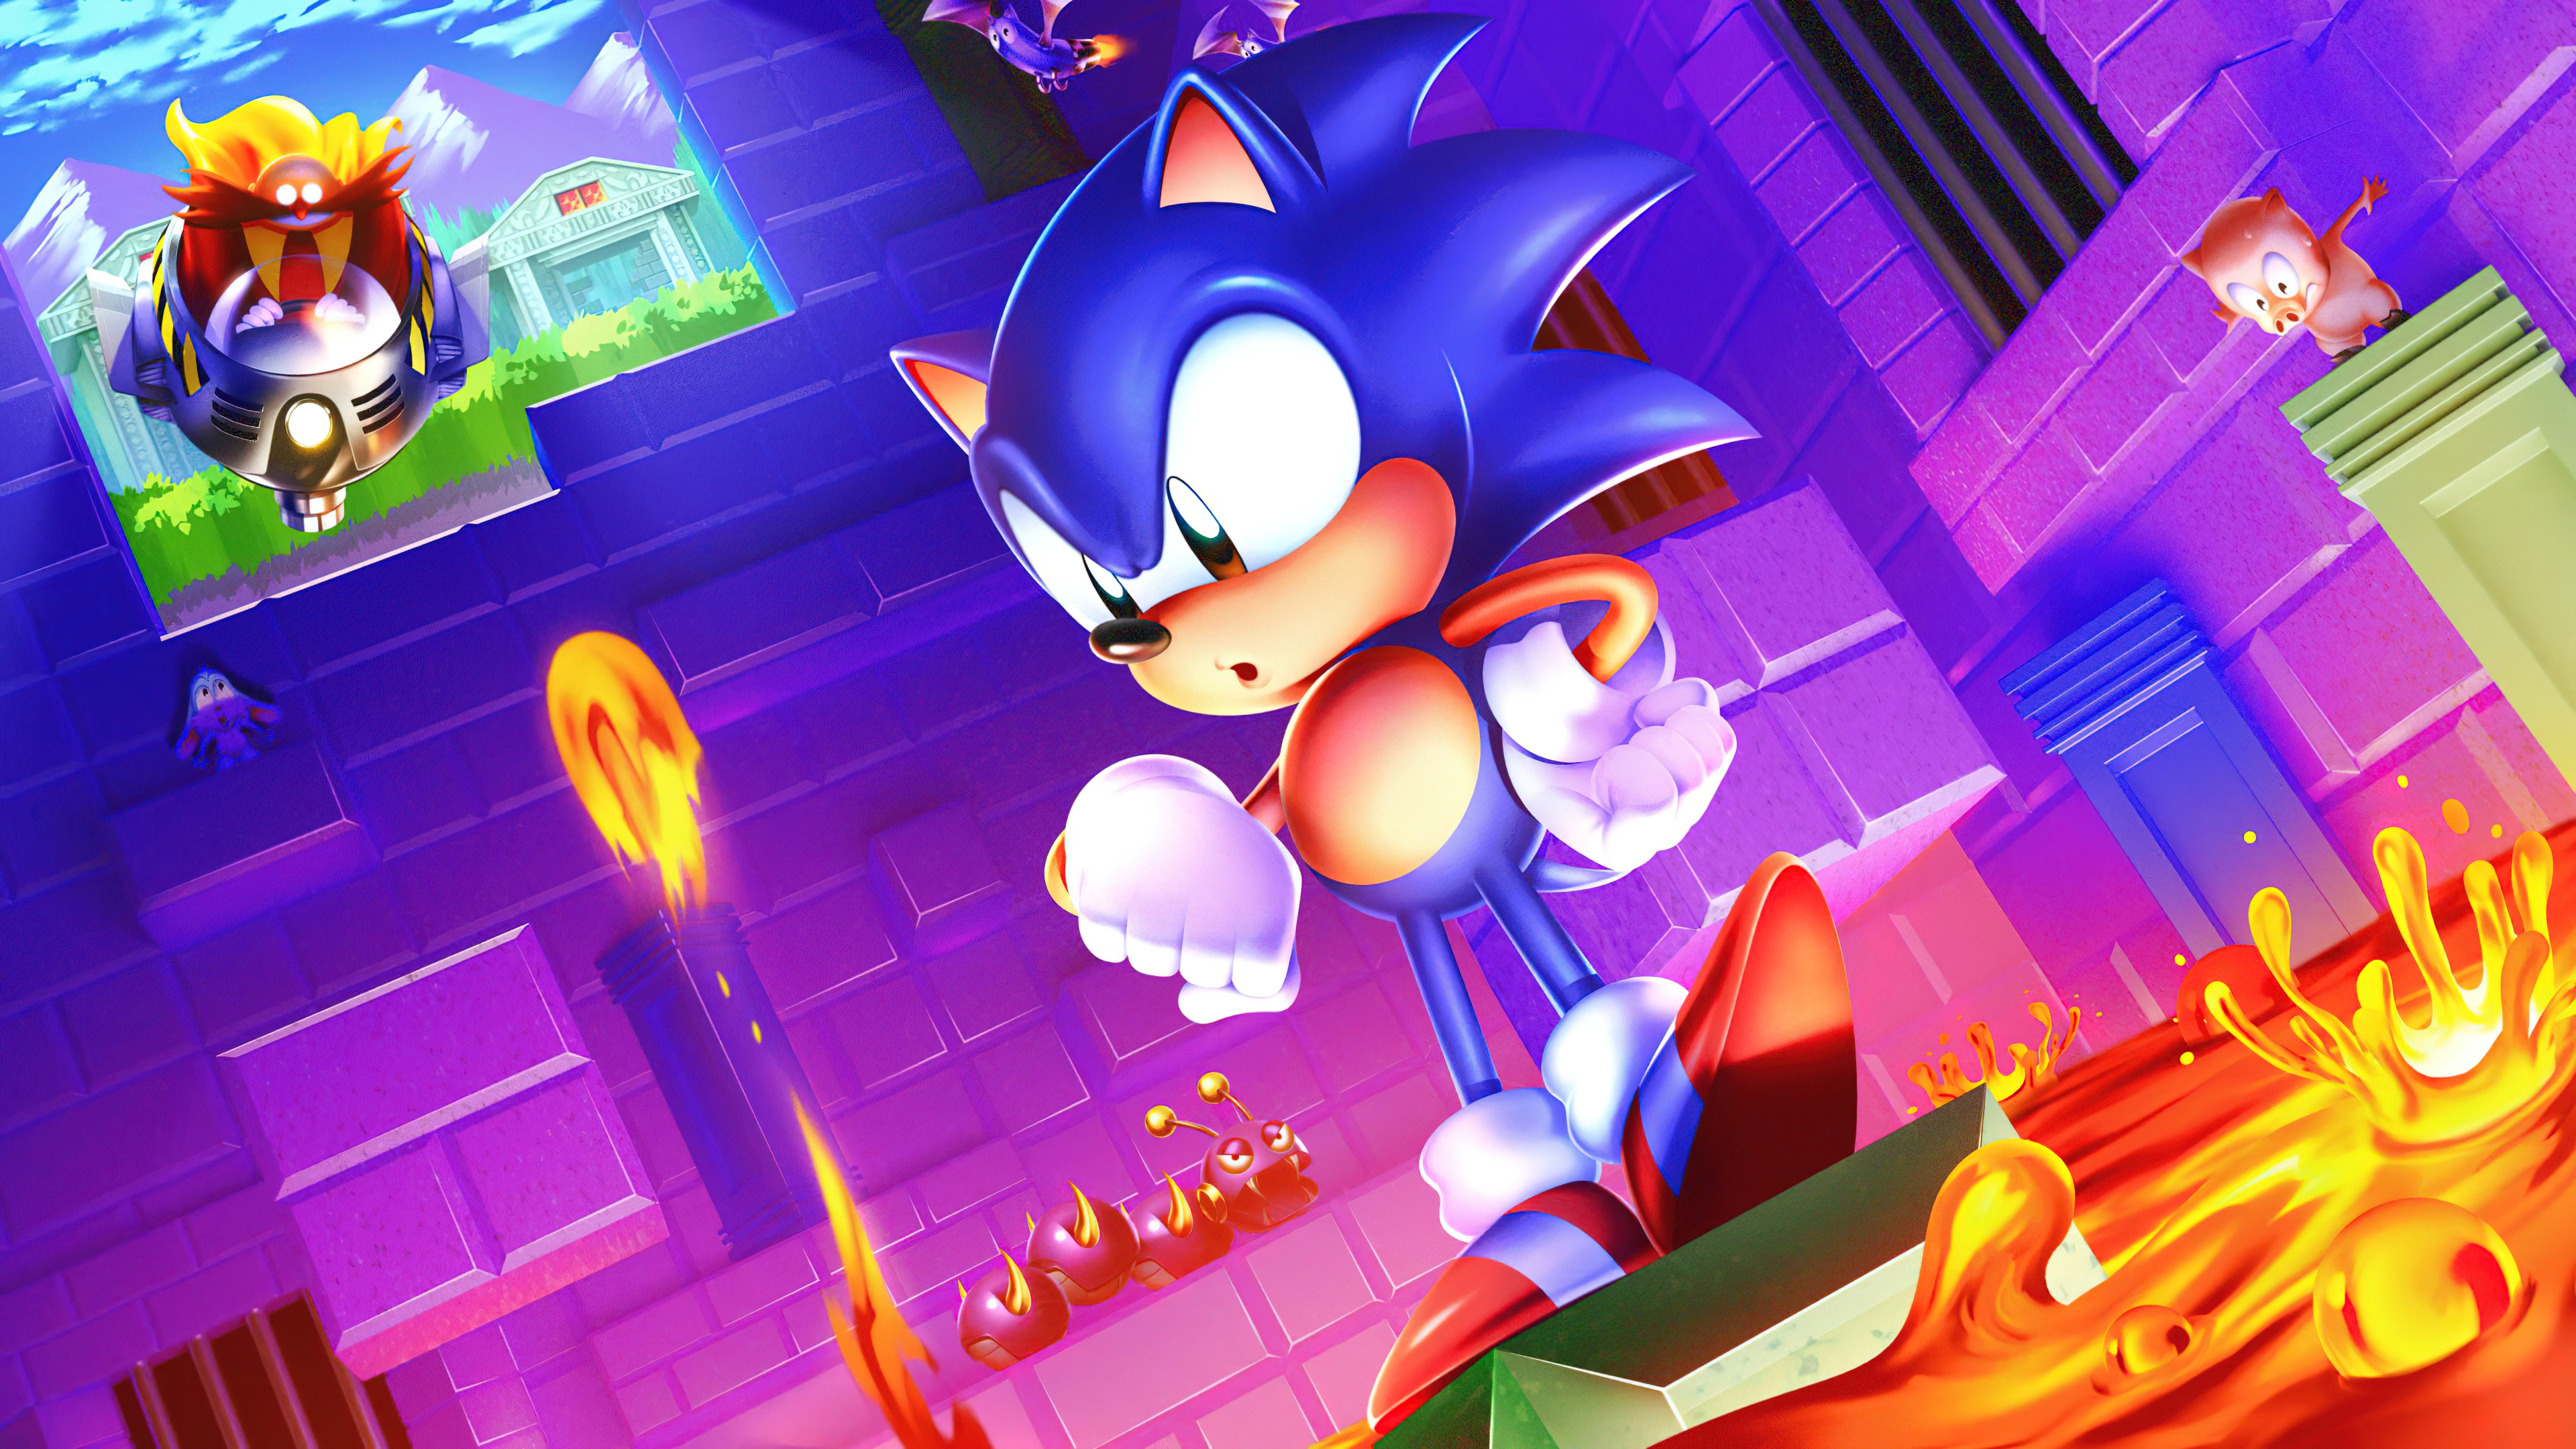 General 3840x2160 Sonic Sonic the Hedgehog Sonic 3 lava PC gaming video game art Dr. Robotnik comic art 1990s video game characters